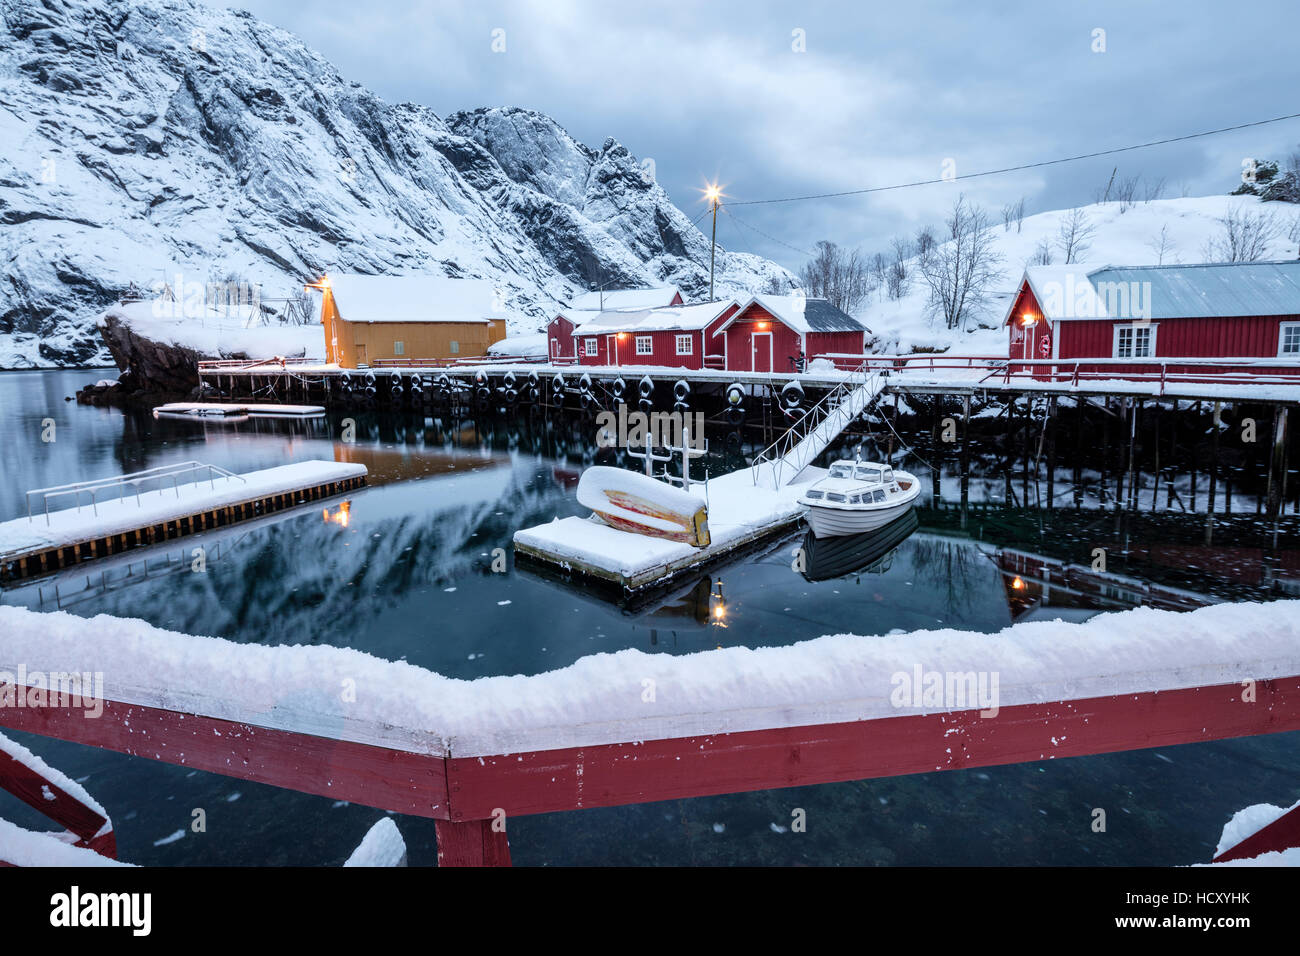 Cold sea and snowy peaks frame the fishing village at dusk, Nusfjord, Nordland, Lofoten Islands, Northern Norway Stock Photo